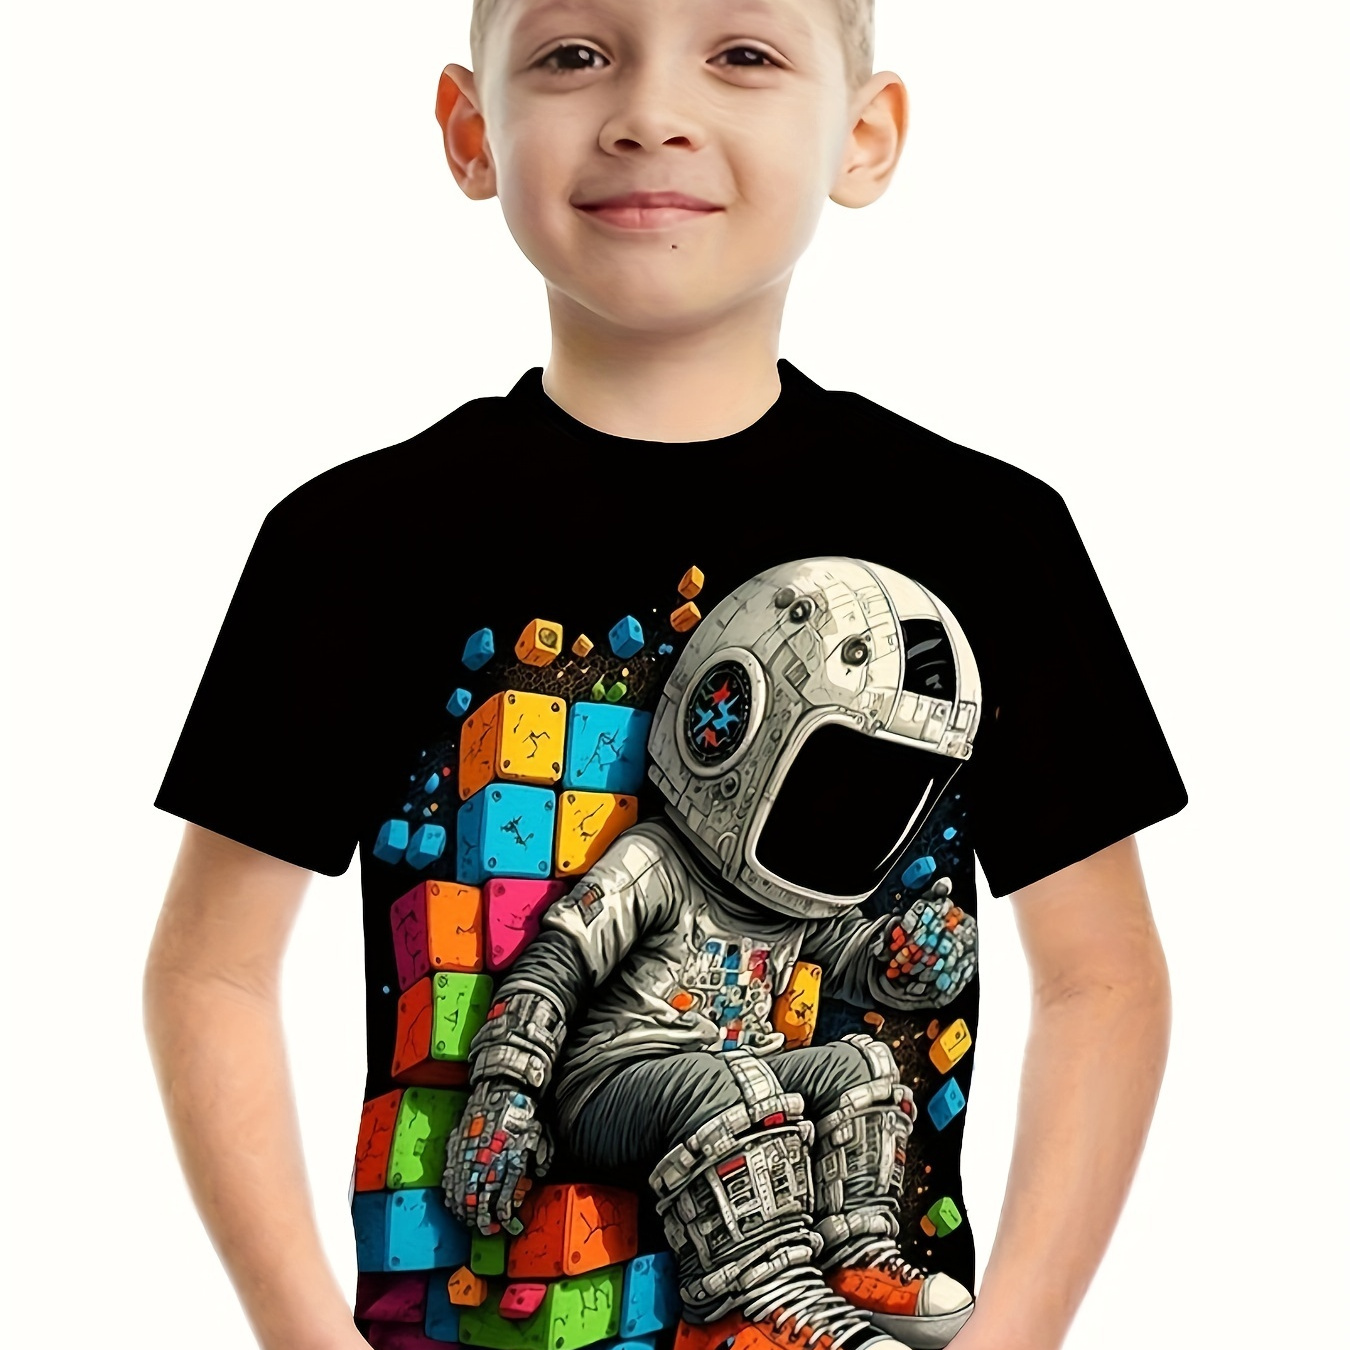 

Astronaut Print Boys Creative T-shirt, Casual Lightweight And Comfortable Short Sleeve Top, Summer Kids Outgoing Clothes